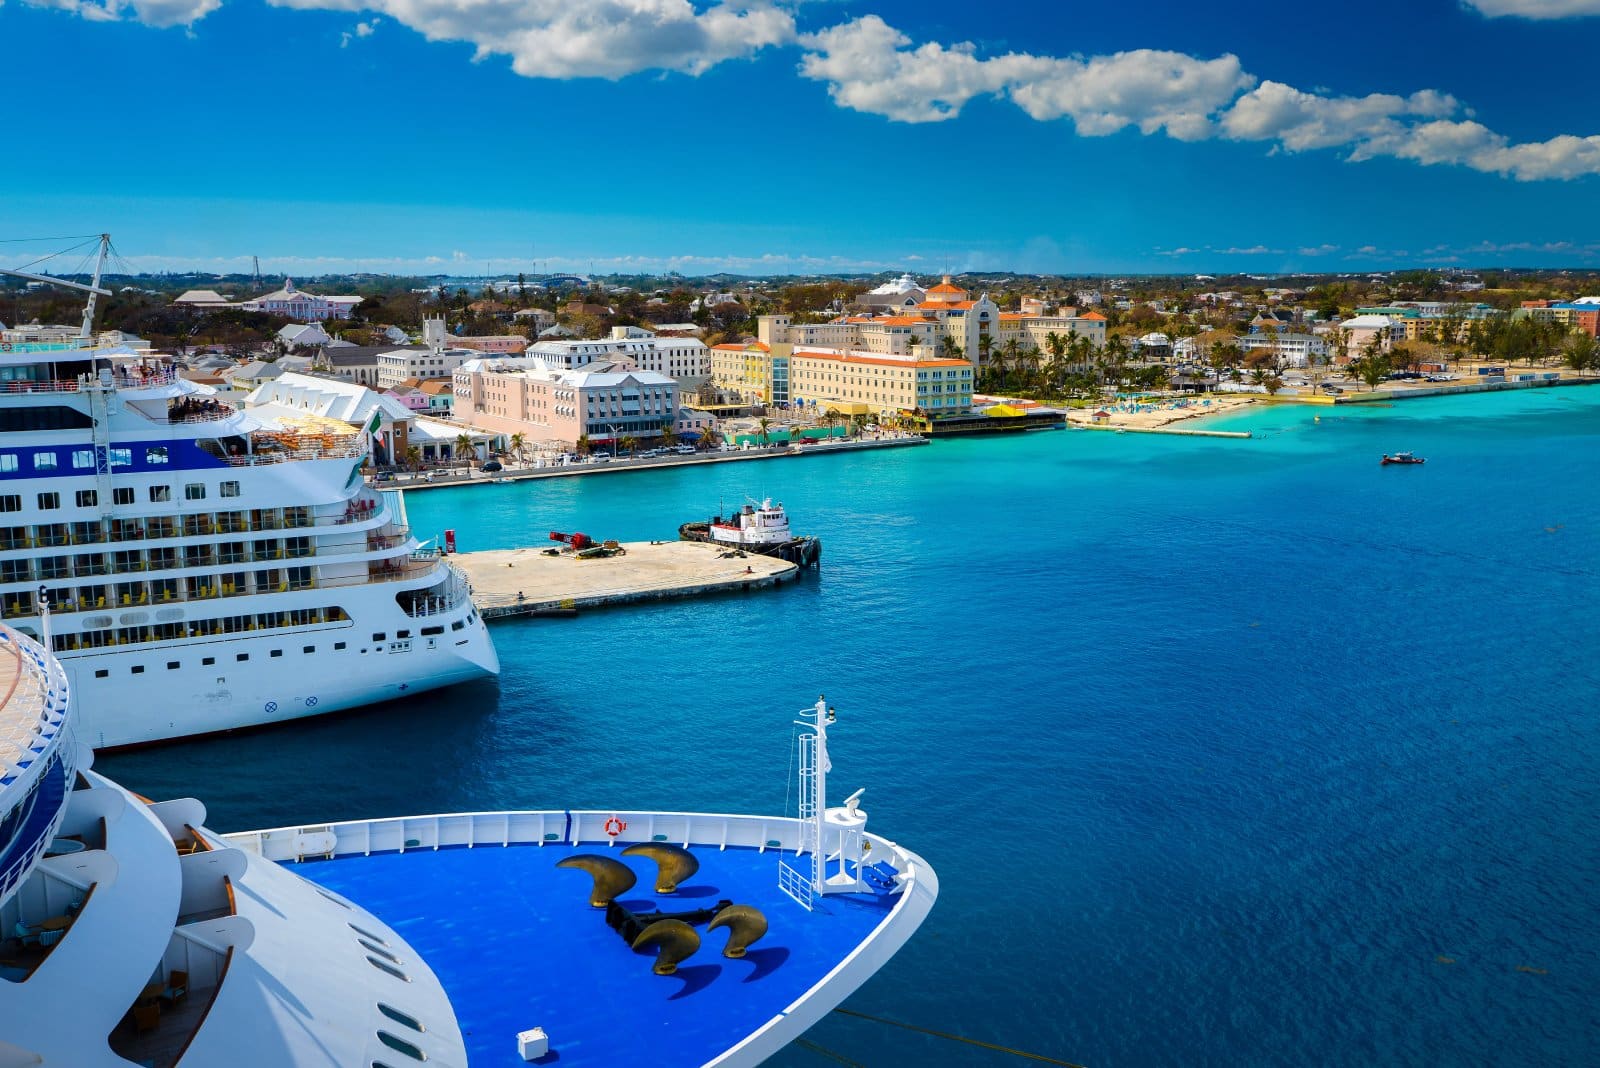 <p class="wp-caption-text">Image Credit: Shutterstock / Costin Constantinescu</p>  <p>Roles vary from entertainment to hospitality on a cruise ship. Enjoy living on the sea while stopping at beautiful ports. Contracts often include room, board, and sometimes travel expenses between contracts.</p>